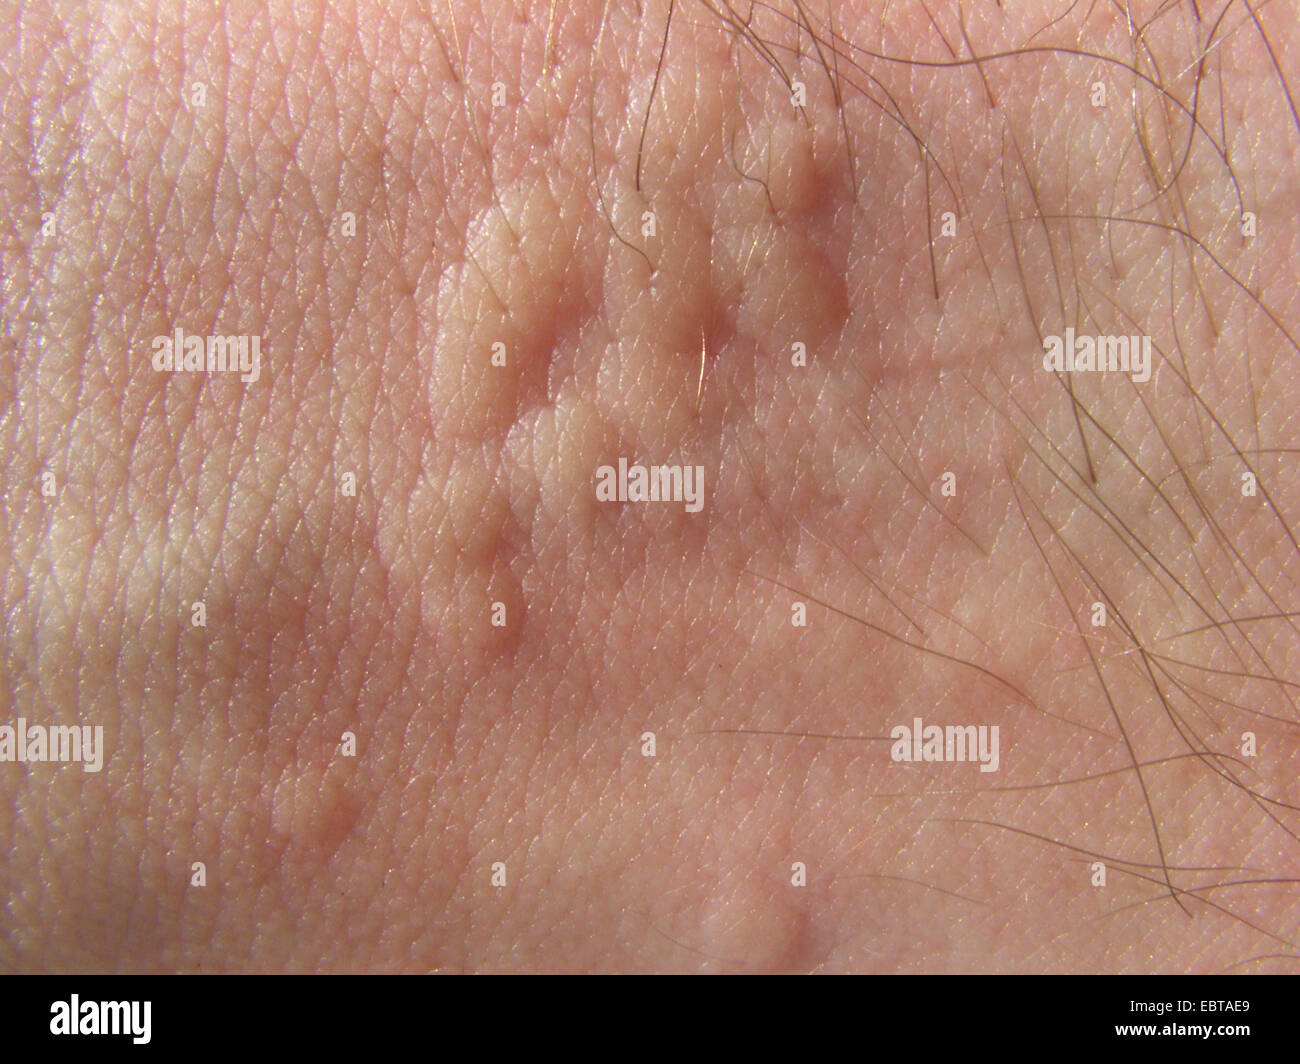 stinging nettle (Urtica dioica), med. skin irritation caused by stinging nettles, Germany Stock Photo